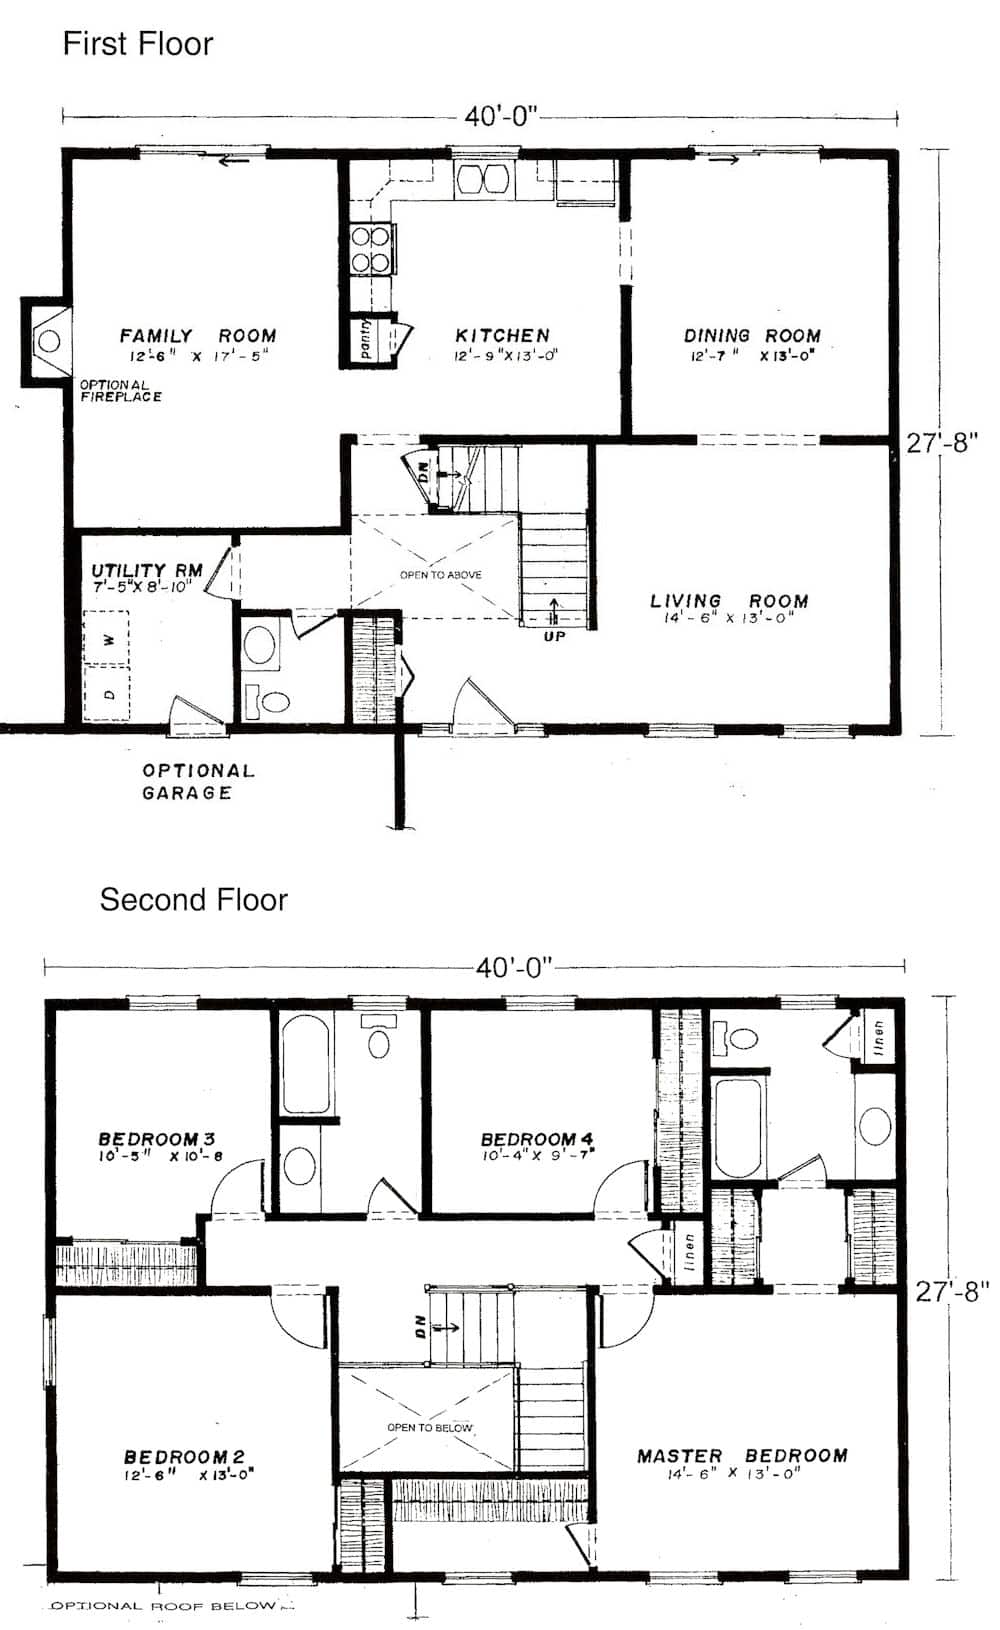 The Clairmont Two Story Home Floor Plan